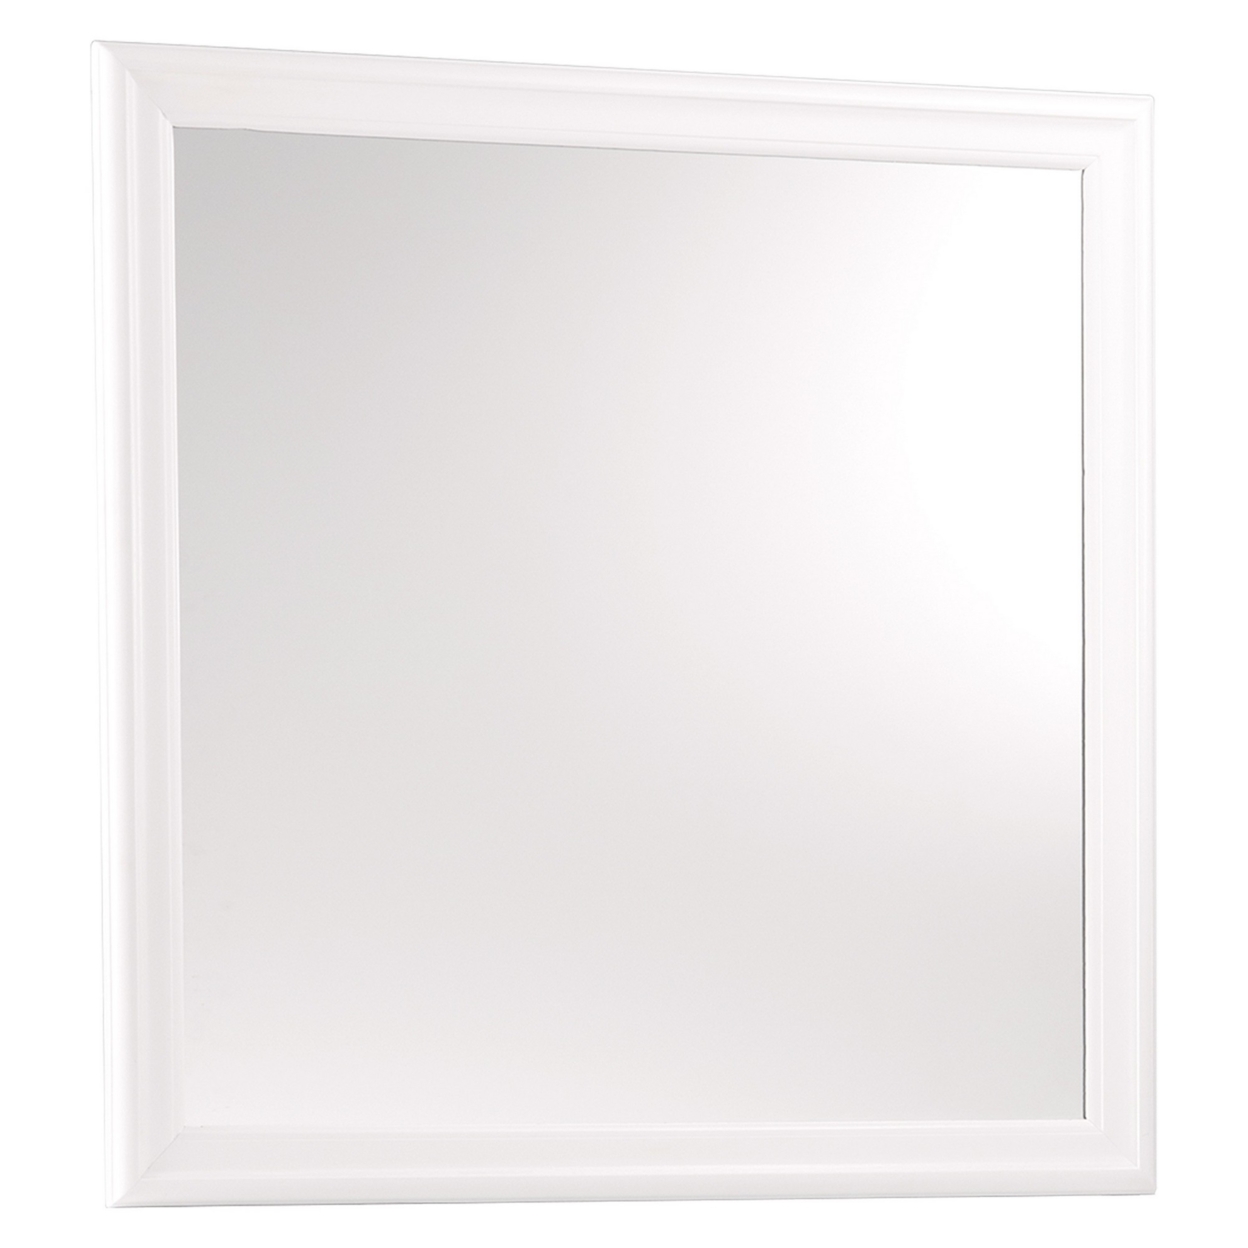 Transitional Square Mirror With Wooden Encasing And Convex Edges, White- Saltoro Sherpi